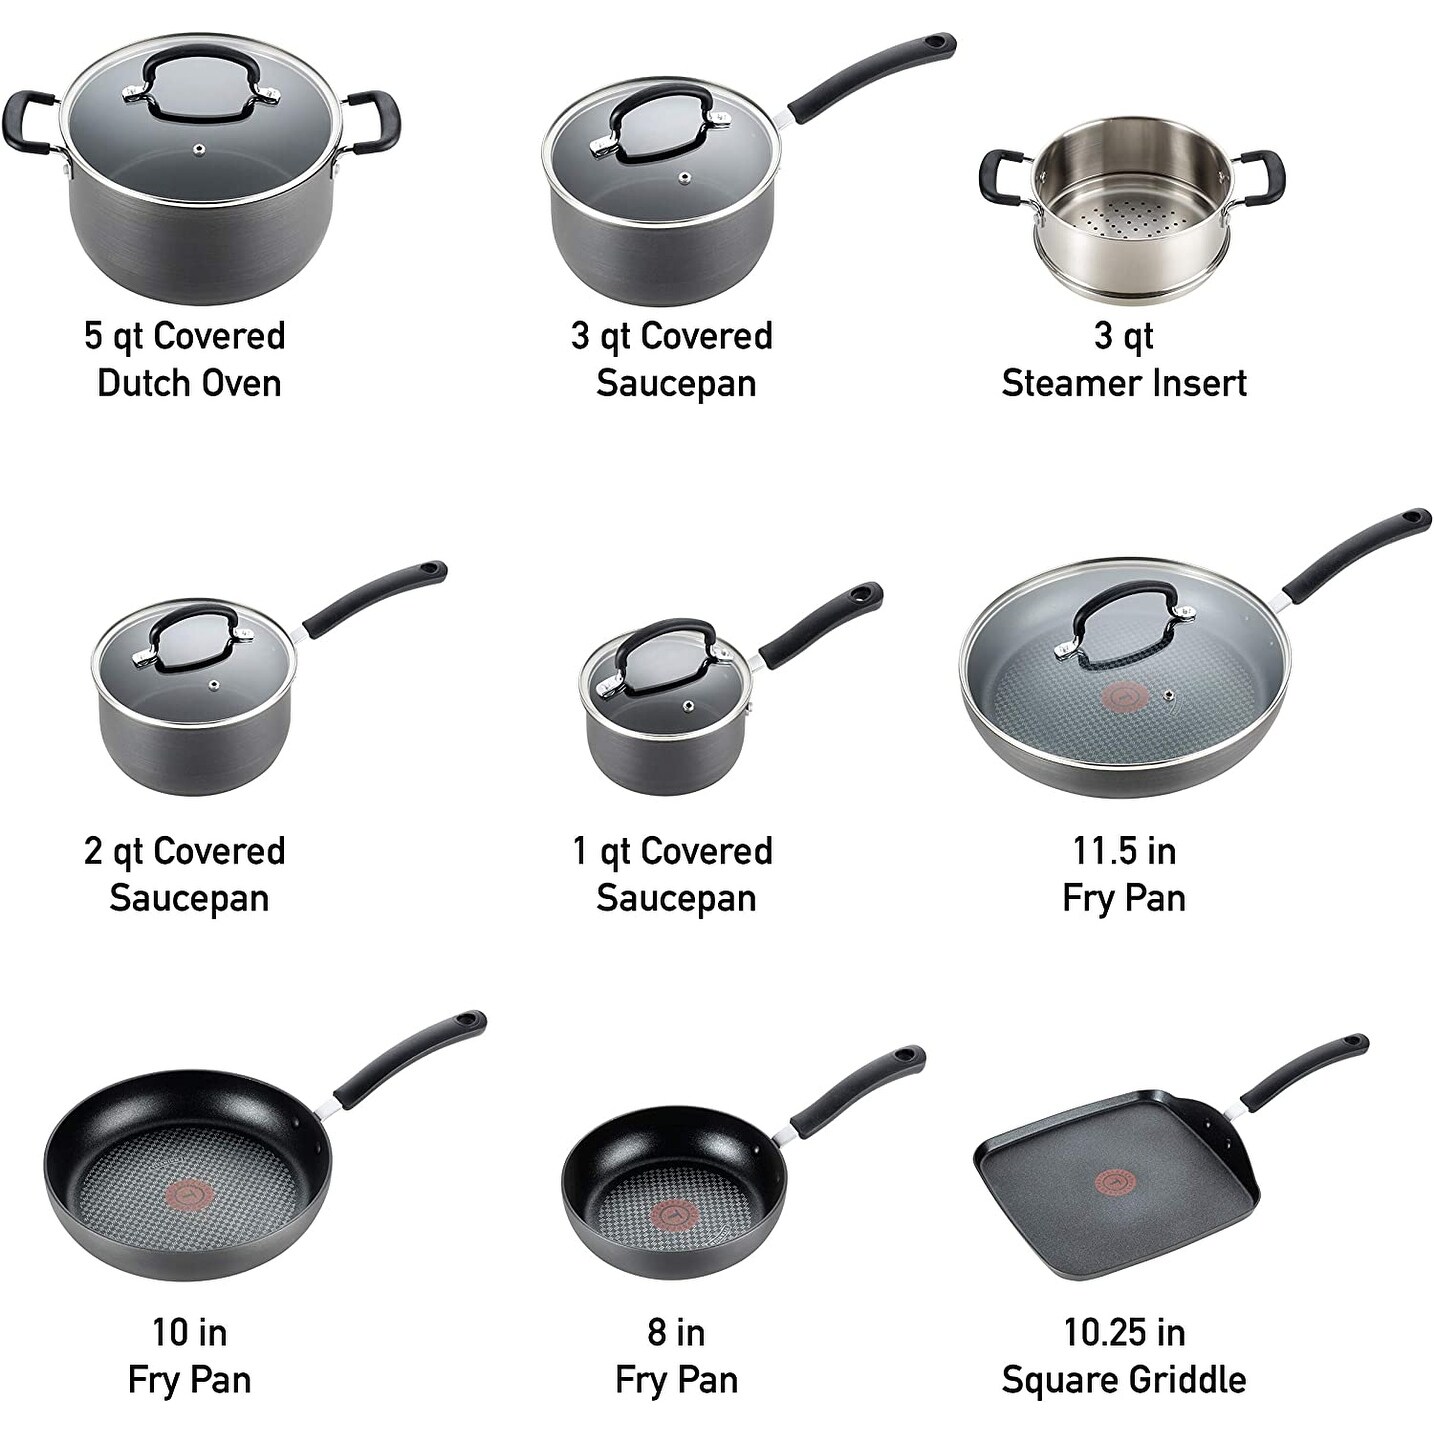 https://ak1.ostkcdn.com/images/products/is/images/direct/e9fb5a66c36f4e0f923bd9c7f4c46b7630343239/T-fal-Ultimate-Hard-Anodized-Nonstick-Cookware-Set-14-Piece-Pots-and-Pans%2C-Dishwasher-Safe-Black.jpg